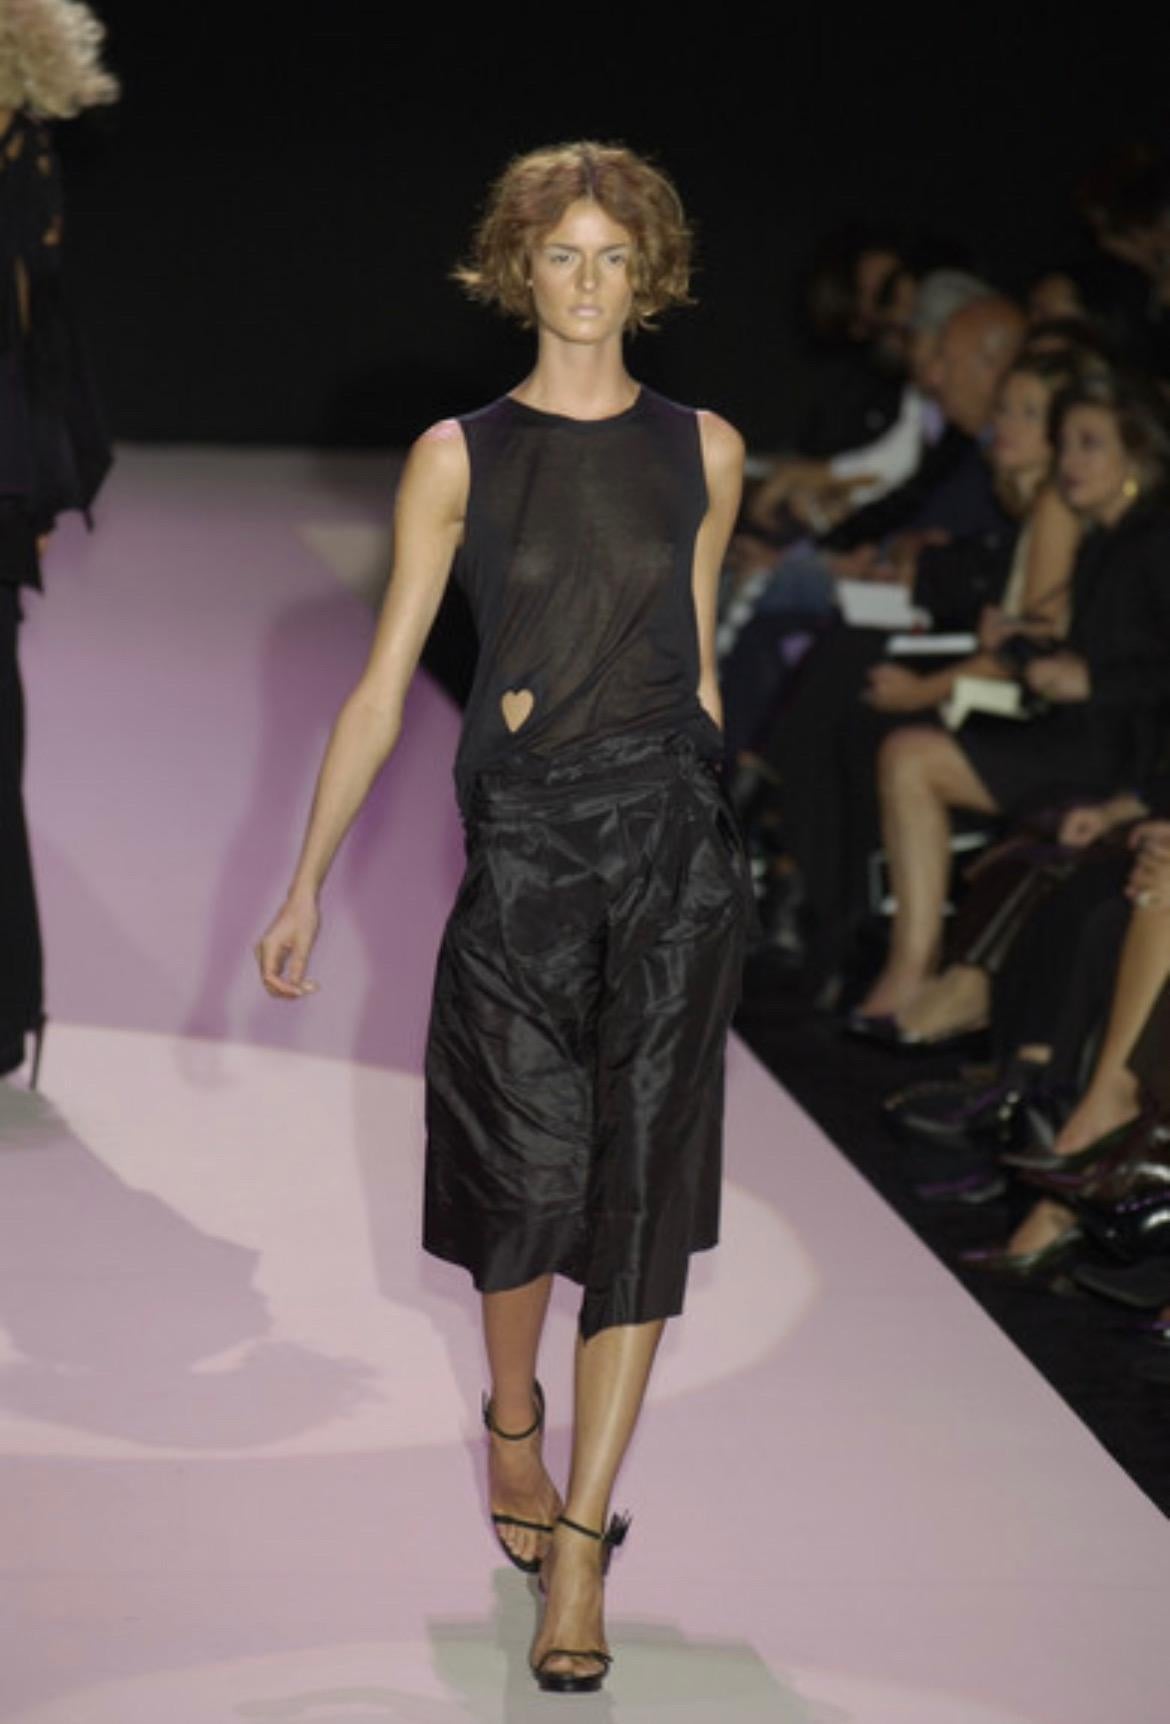 Presenting a black silk taffeta Gucci skirt, designed by Tom Ford. From the Spring/Summer 2002 collection, this skirt debuted on the season's runway as part of look 33, modeled by Jacquetta Wheeler. This voluminous skirt is constructed of